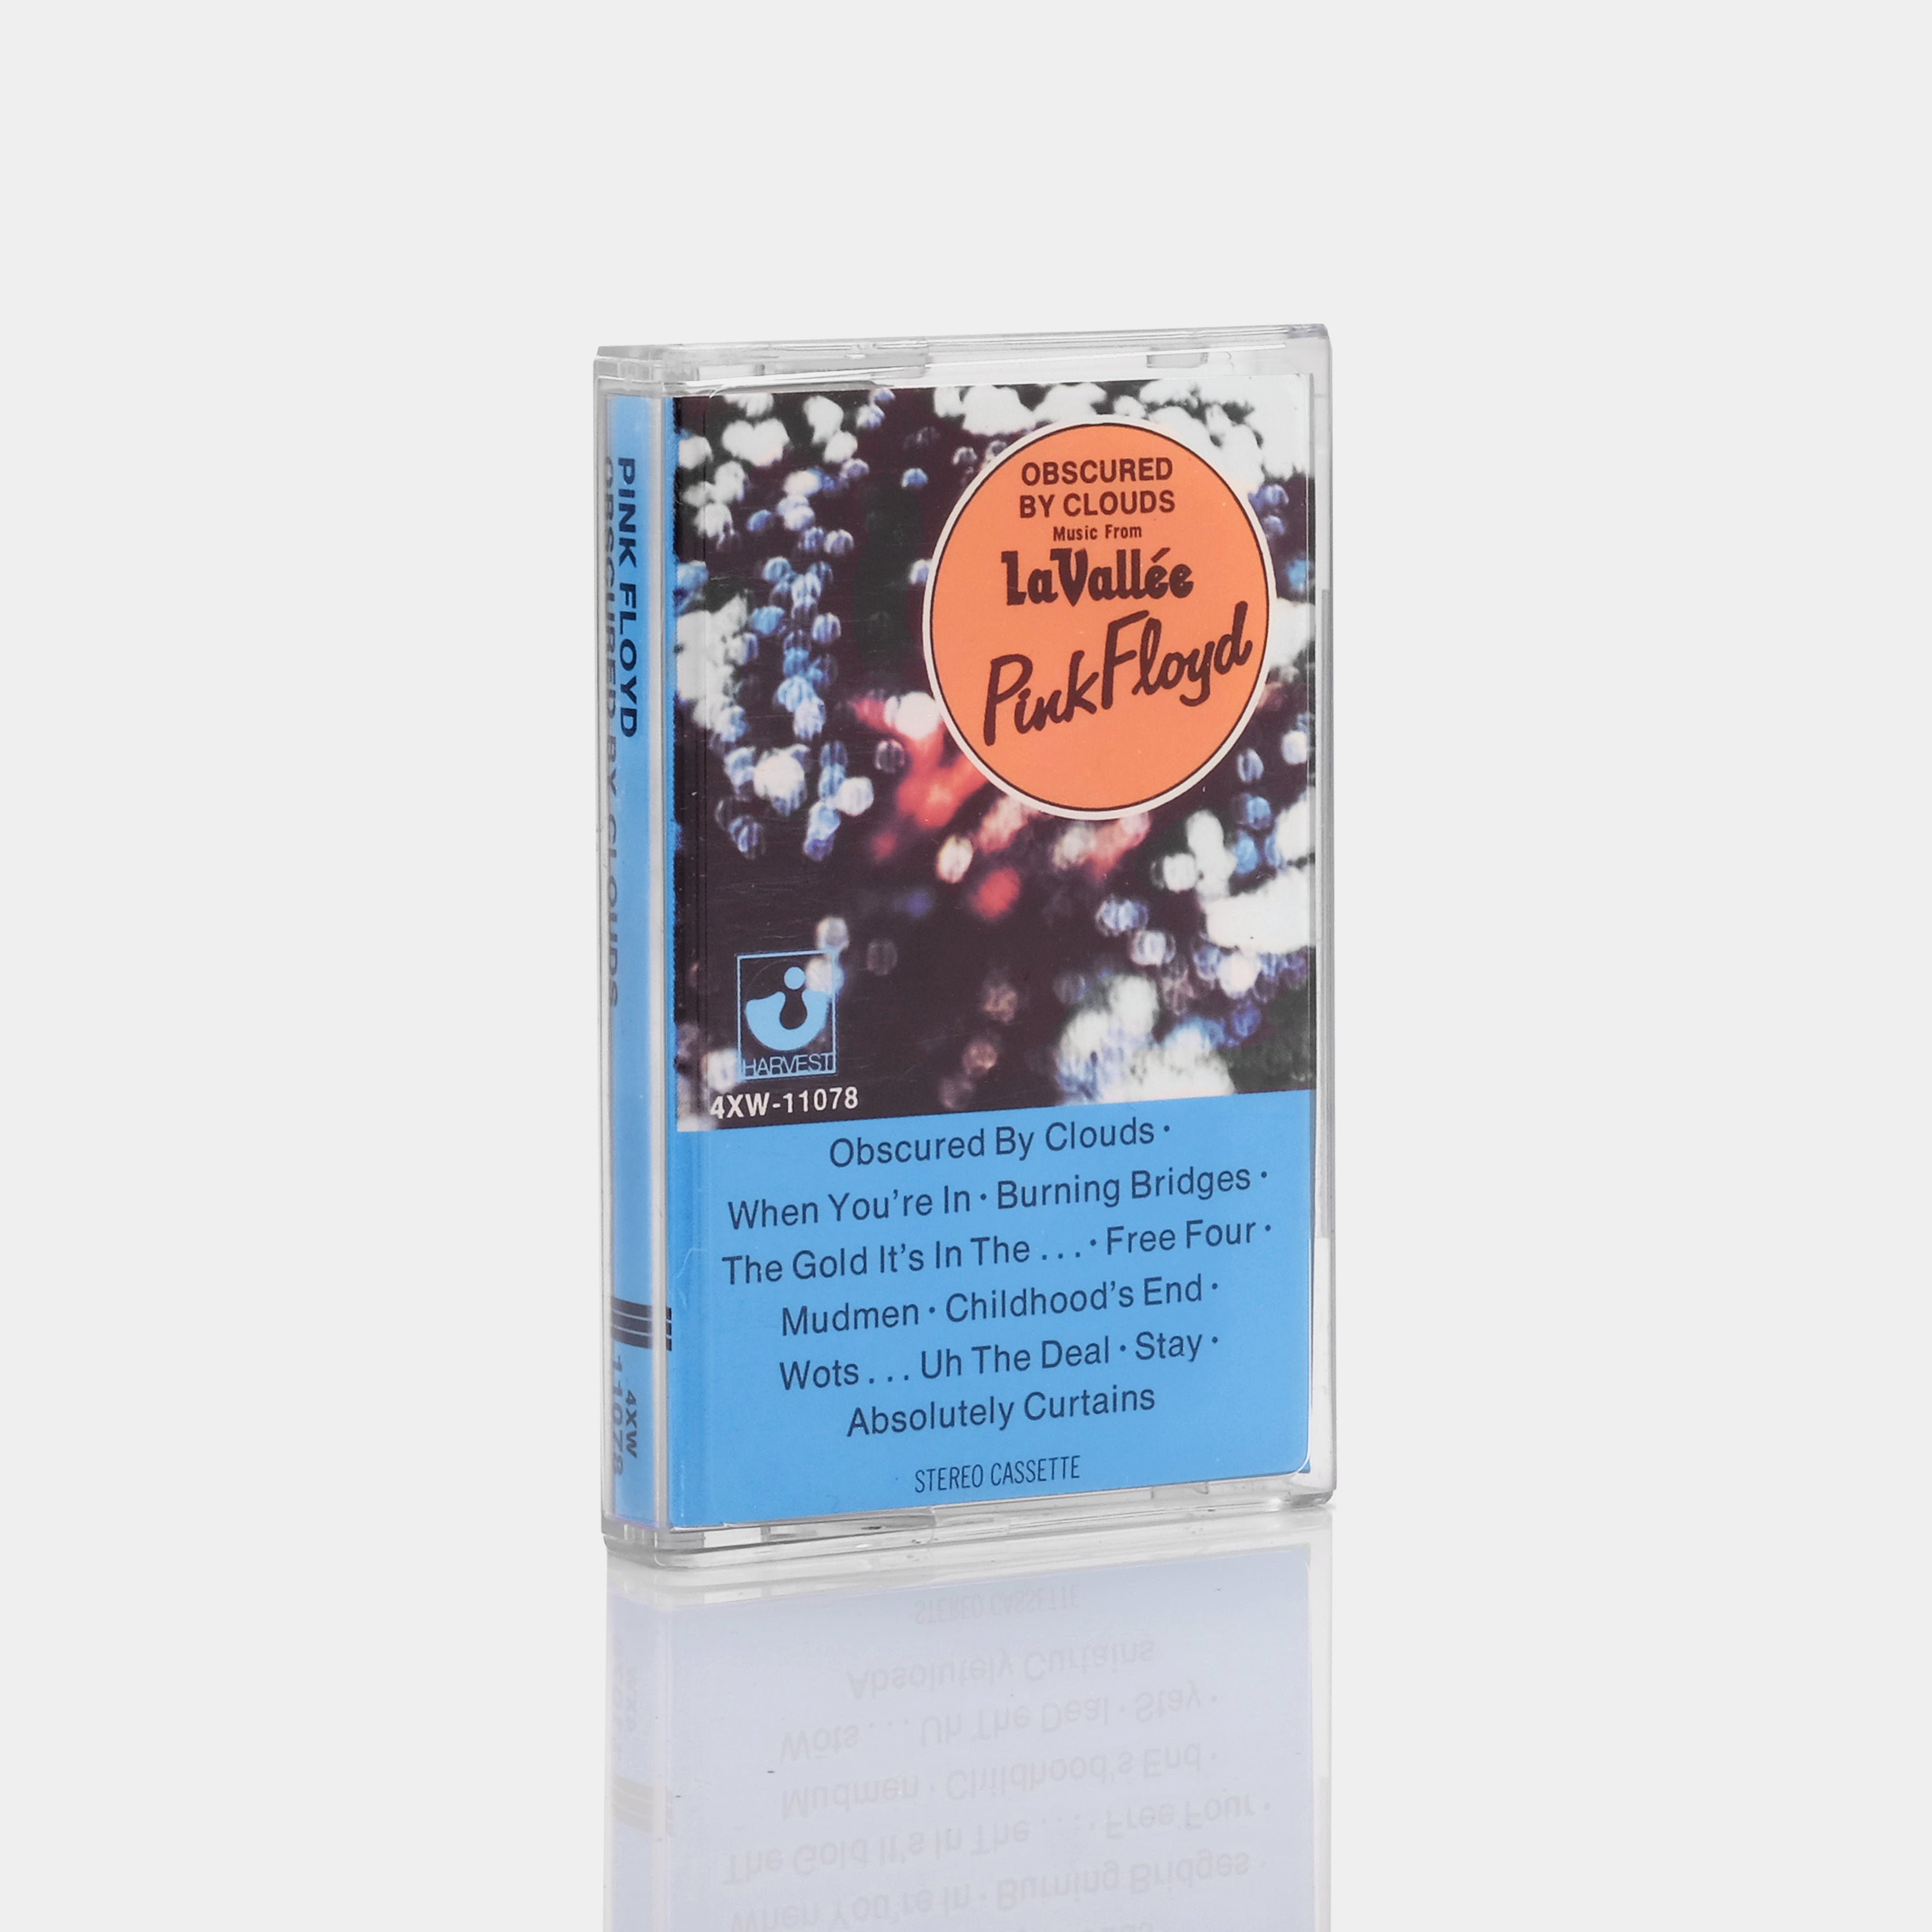 Pink Floyd - Obscured By Clouds Cassette Tape